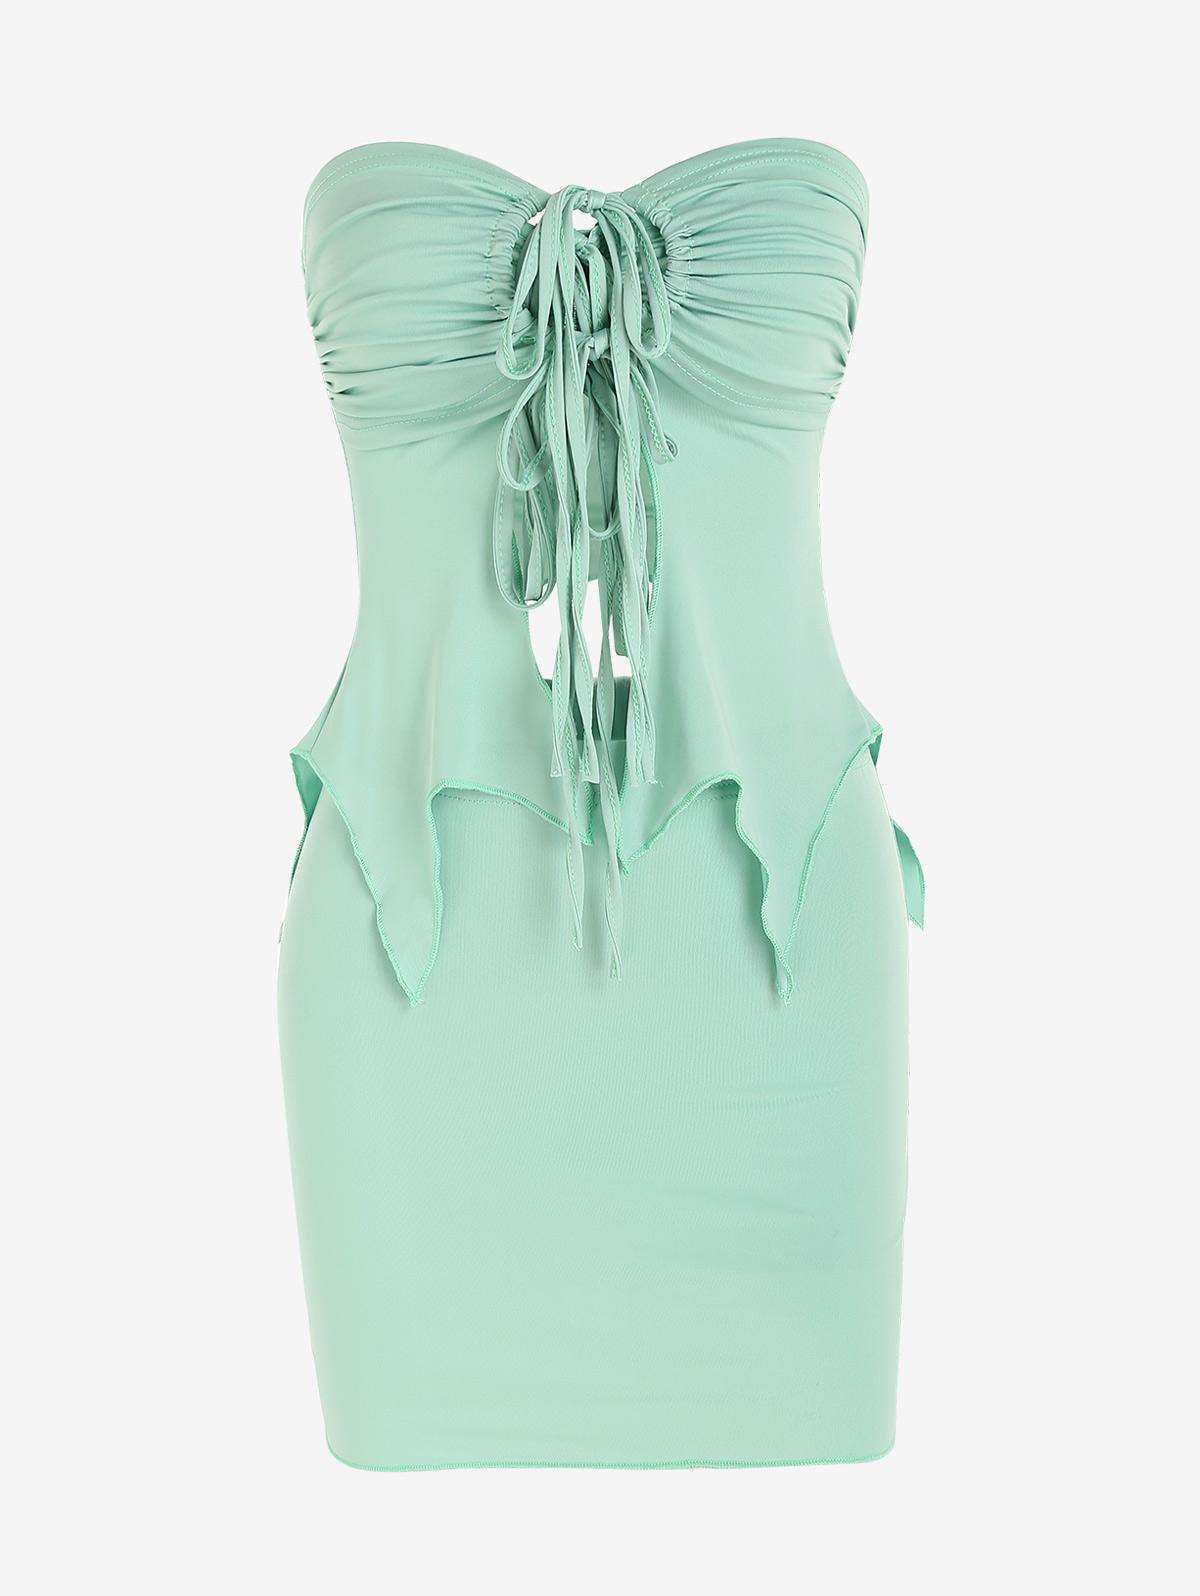 ZAFUL Women's Sexy Club Going Out Co Ord Strapless Cinched Drawstring Tie Slit Sharkbite Hem Top with Mini Bodycon Skirt Set M Light green - Gender: female